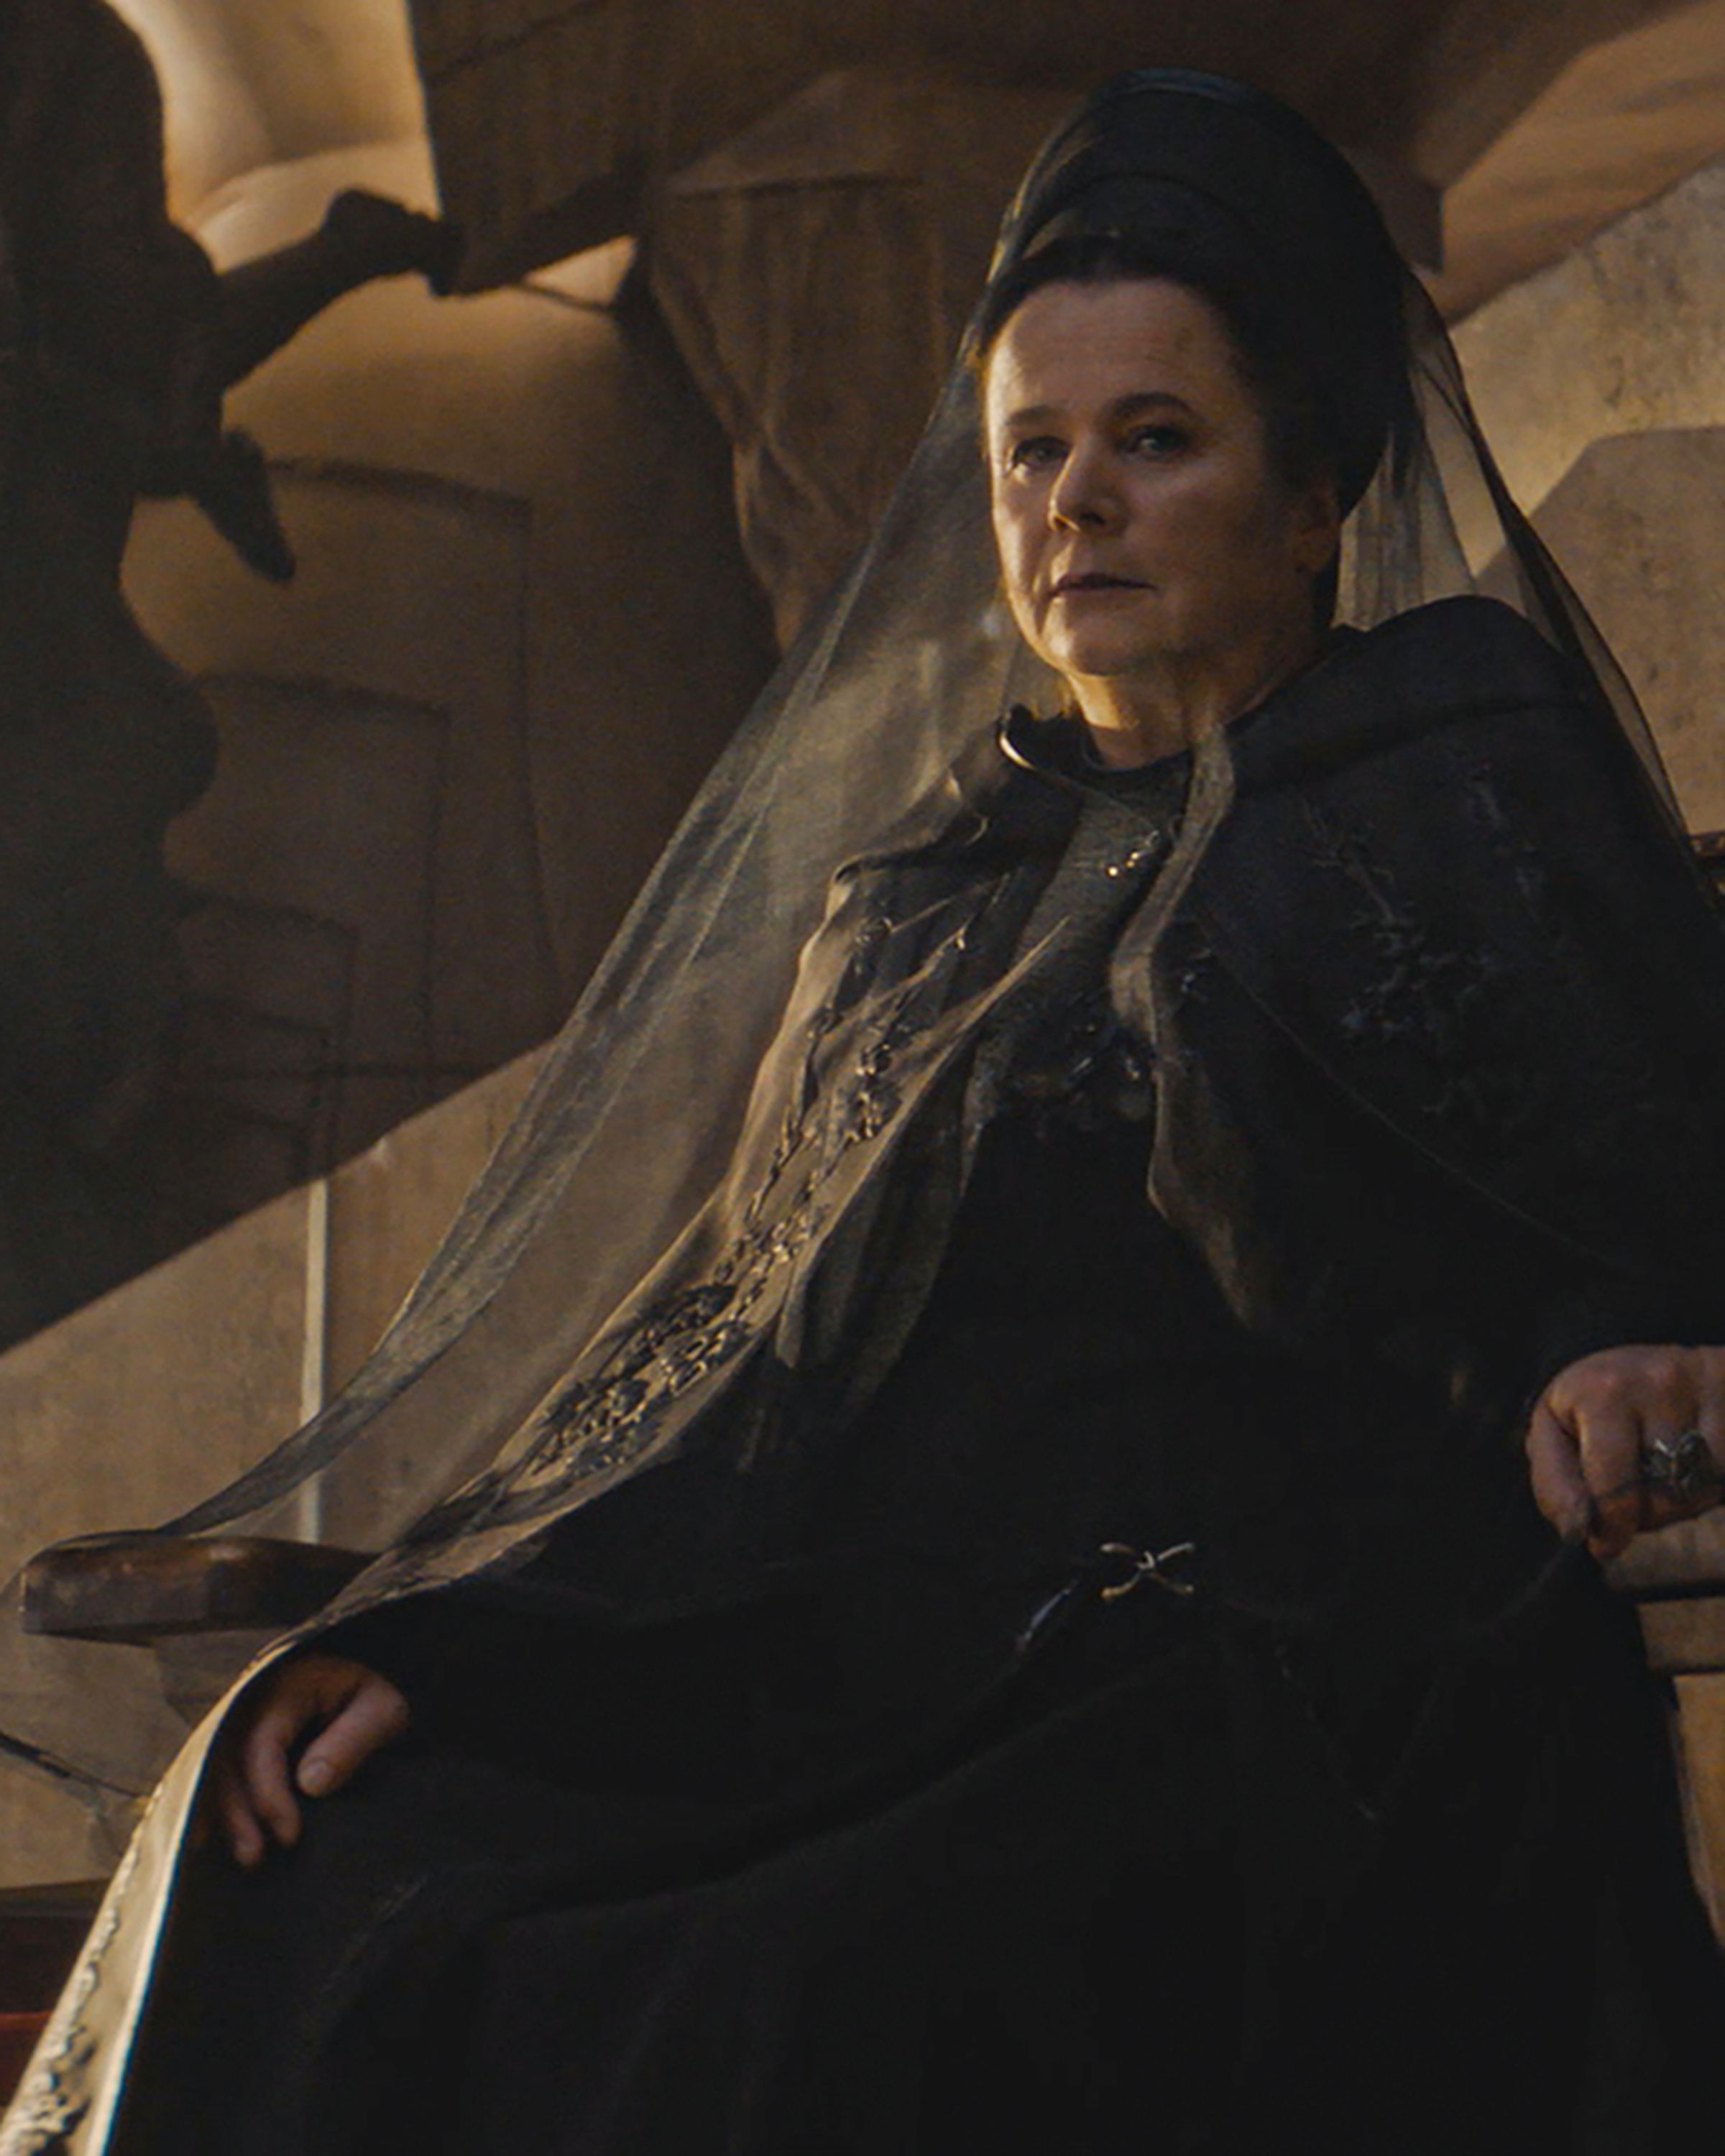 A still photo of Emily Watson as Valya Harkonnen in the TV series Dune: Prophecy.